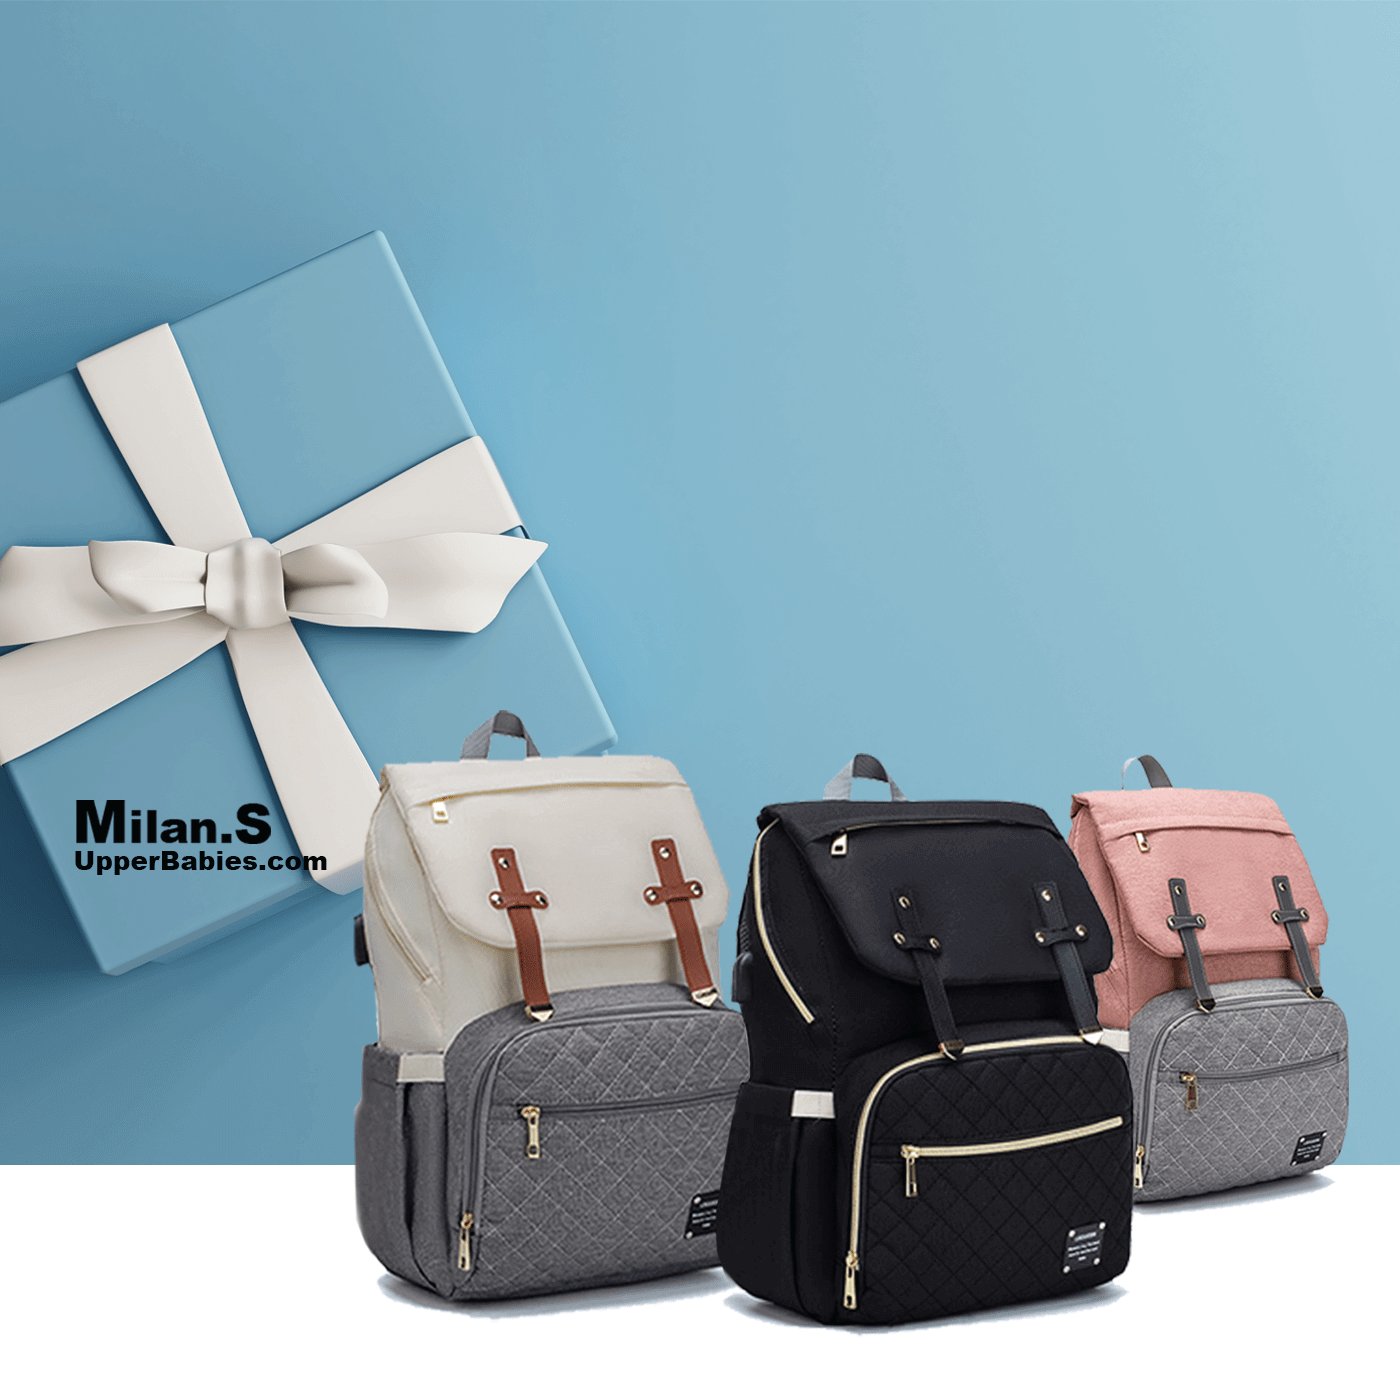 Best Diaper Bag Backpack | Best Baby Shower Gifts | Best Mommy Hospital Bag | Best Mom Baby Essential Products for Babylist Registry | Best Mommy & Baby Bag for Hospital |  Holiday Gift Ideas for Baby & Mommy | UPPER